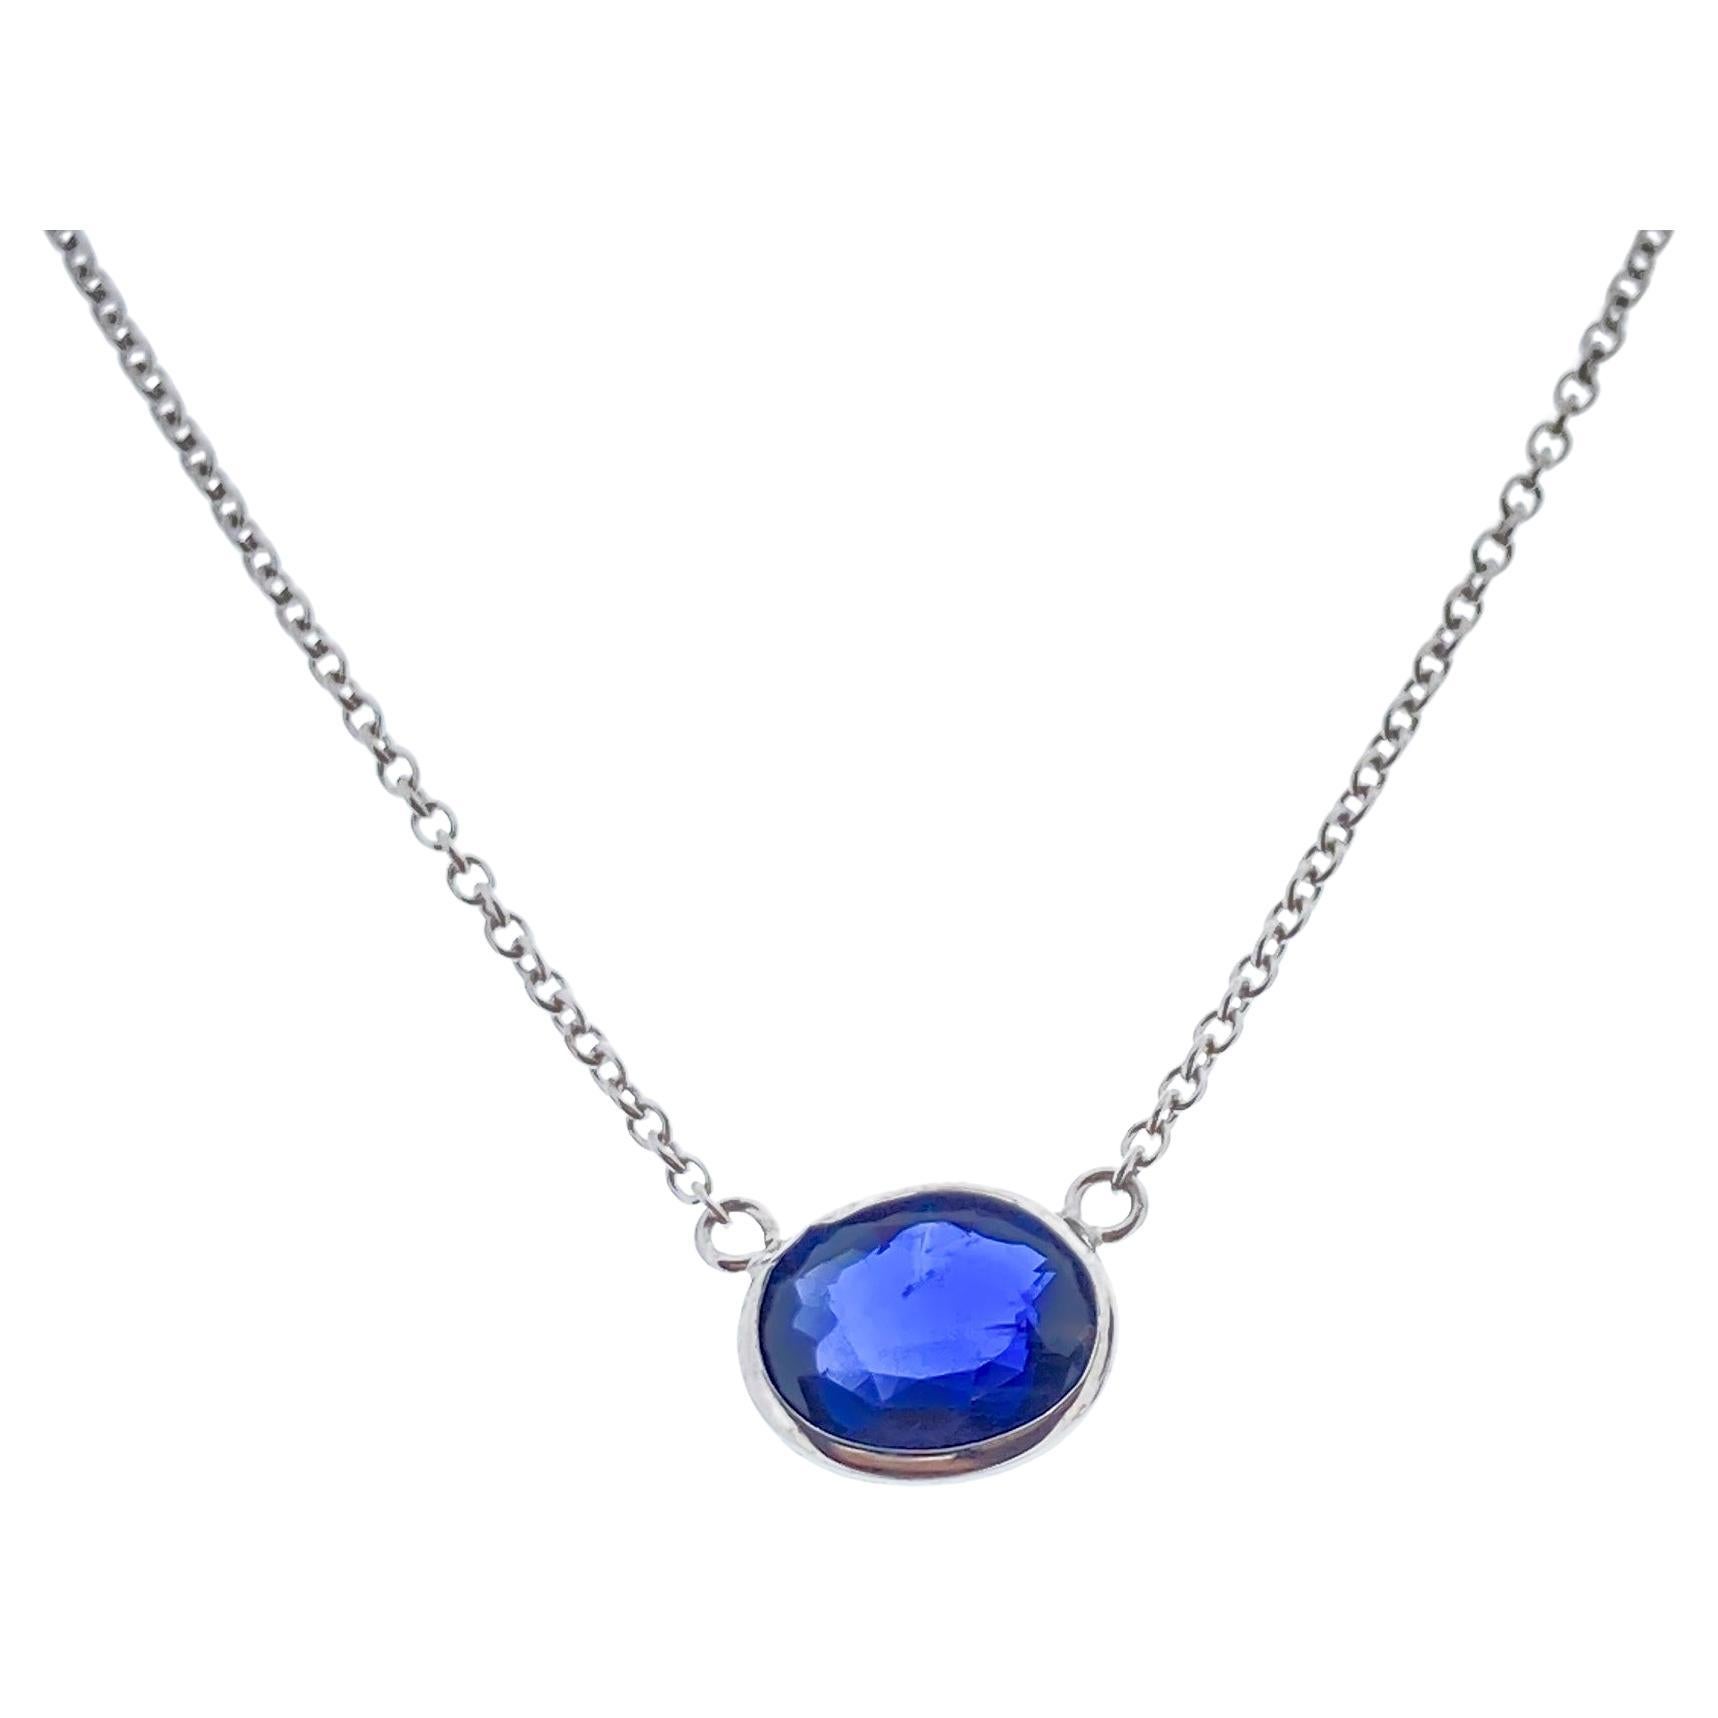 2.04 Carat Blue Oval Sapphire Fashion Necklaces In 14K White Gold 